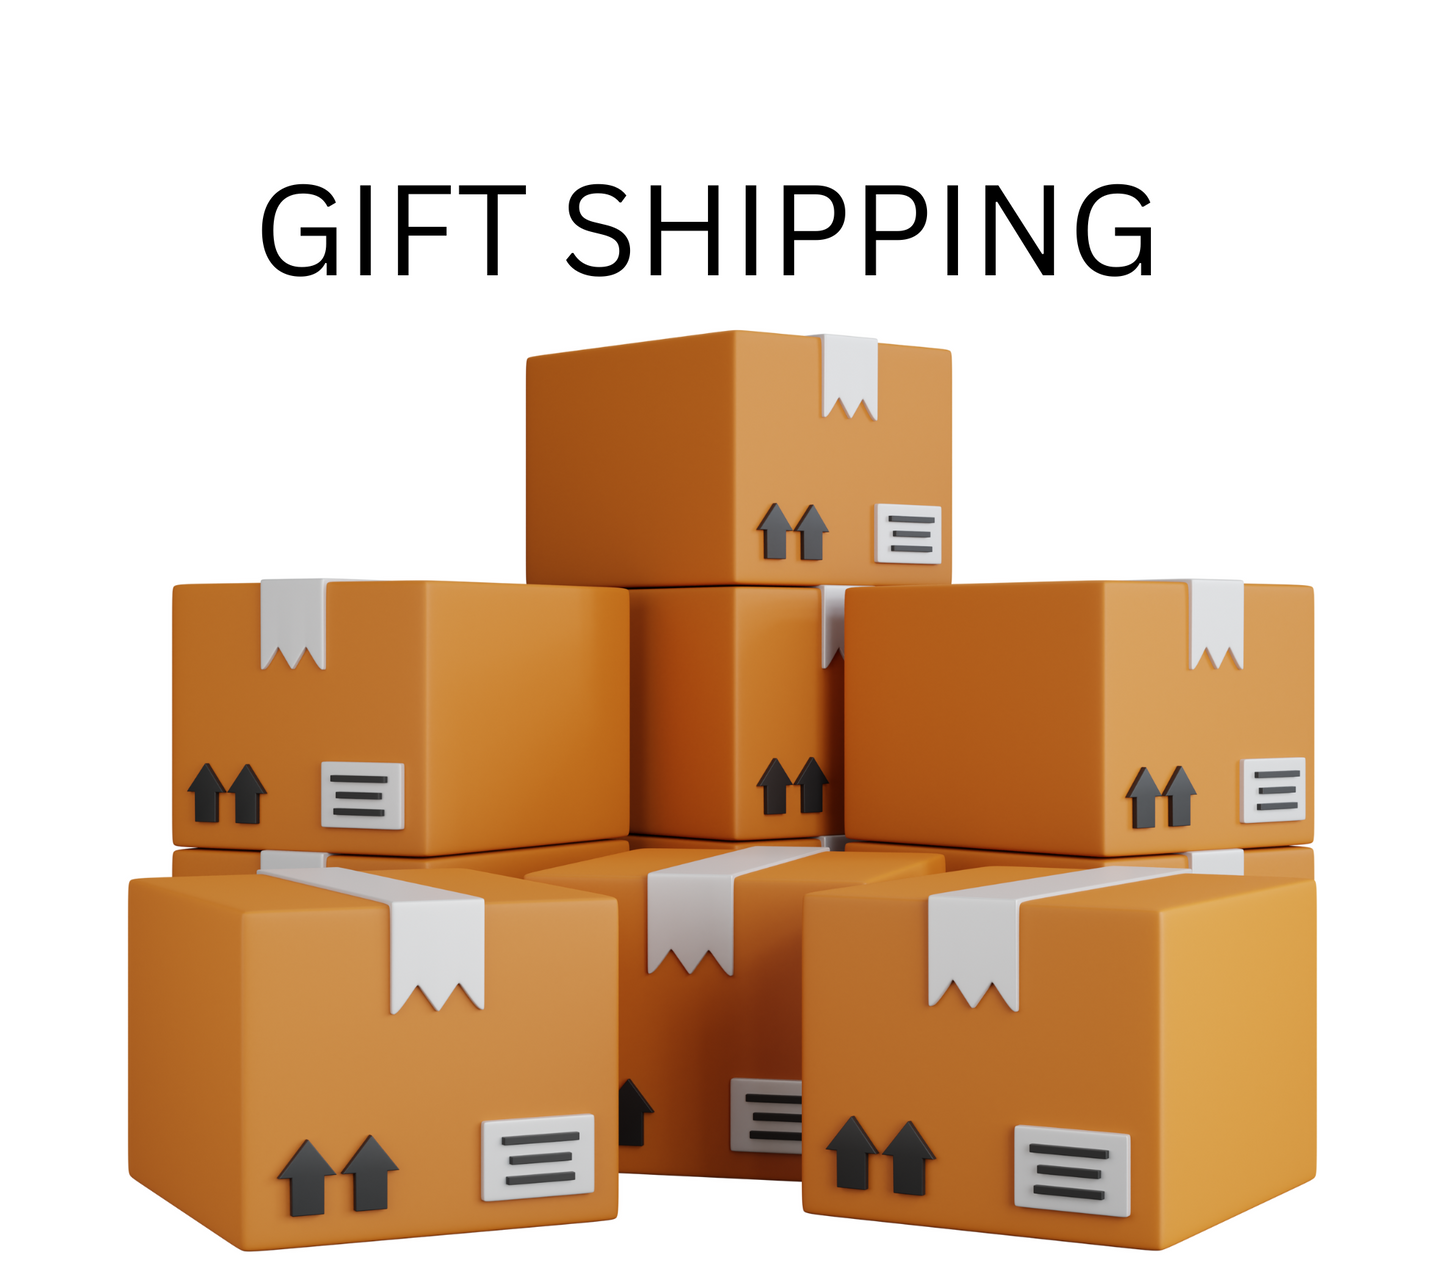 GIFTING SHIPPING PLEASE